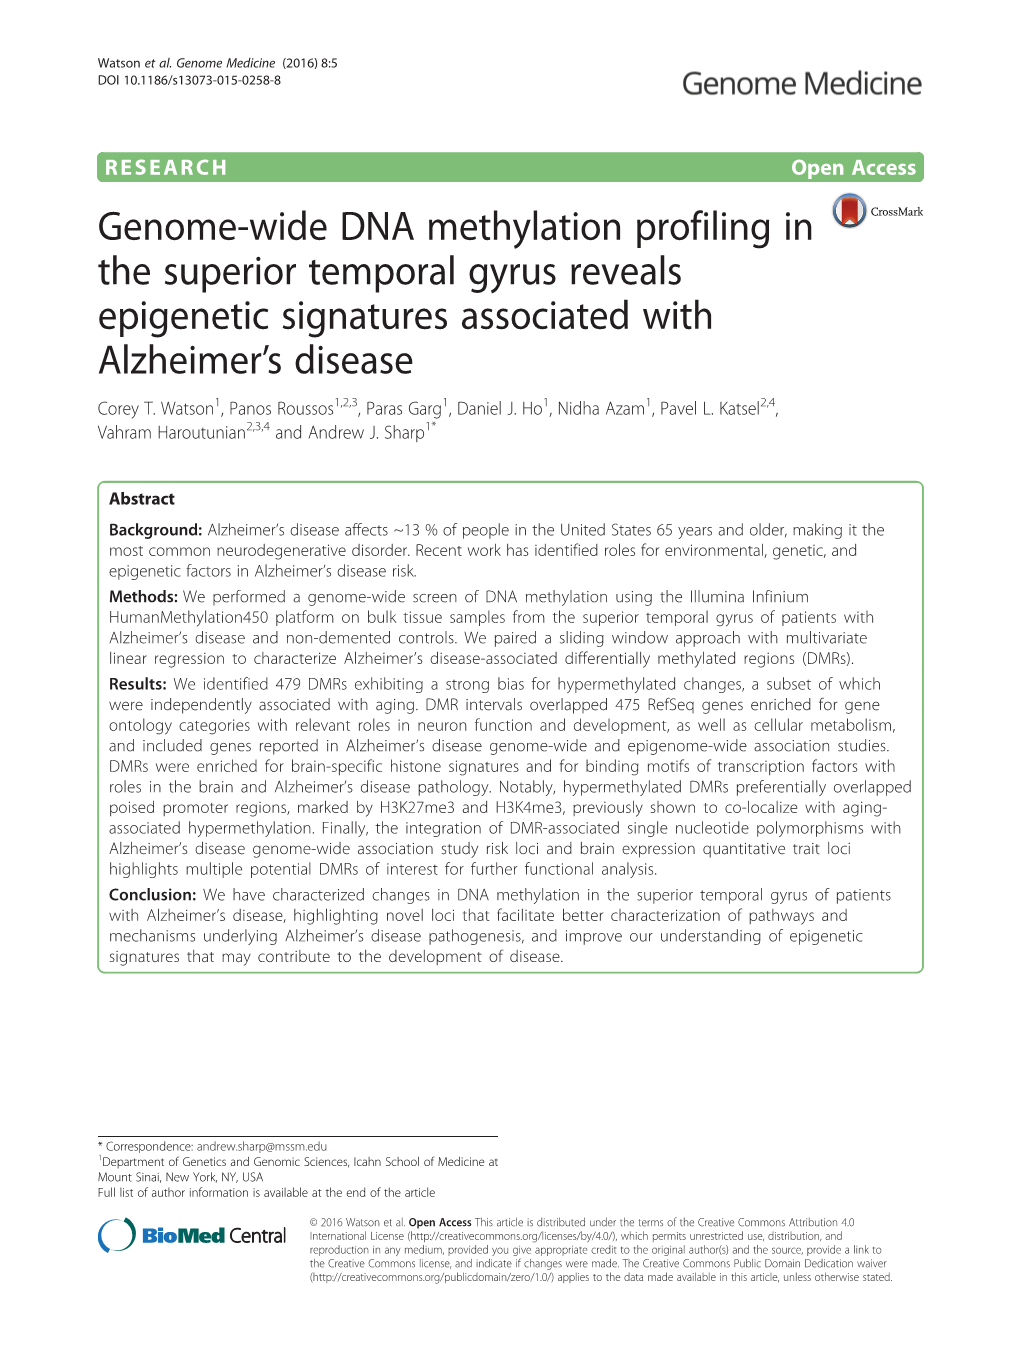 Genome-Wide DNA Methylation Profiling in the Superior Temporal Gyrus Reveals Epigenetic Signatures Associated with Alzheimer's